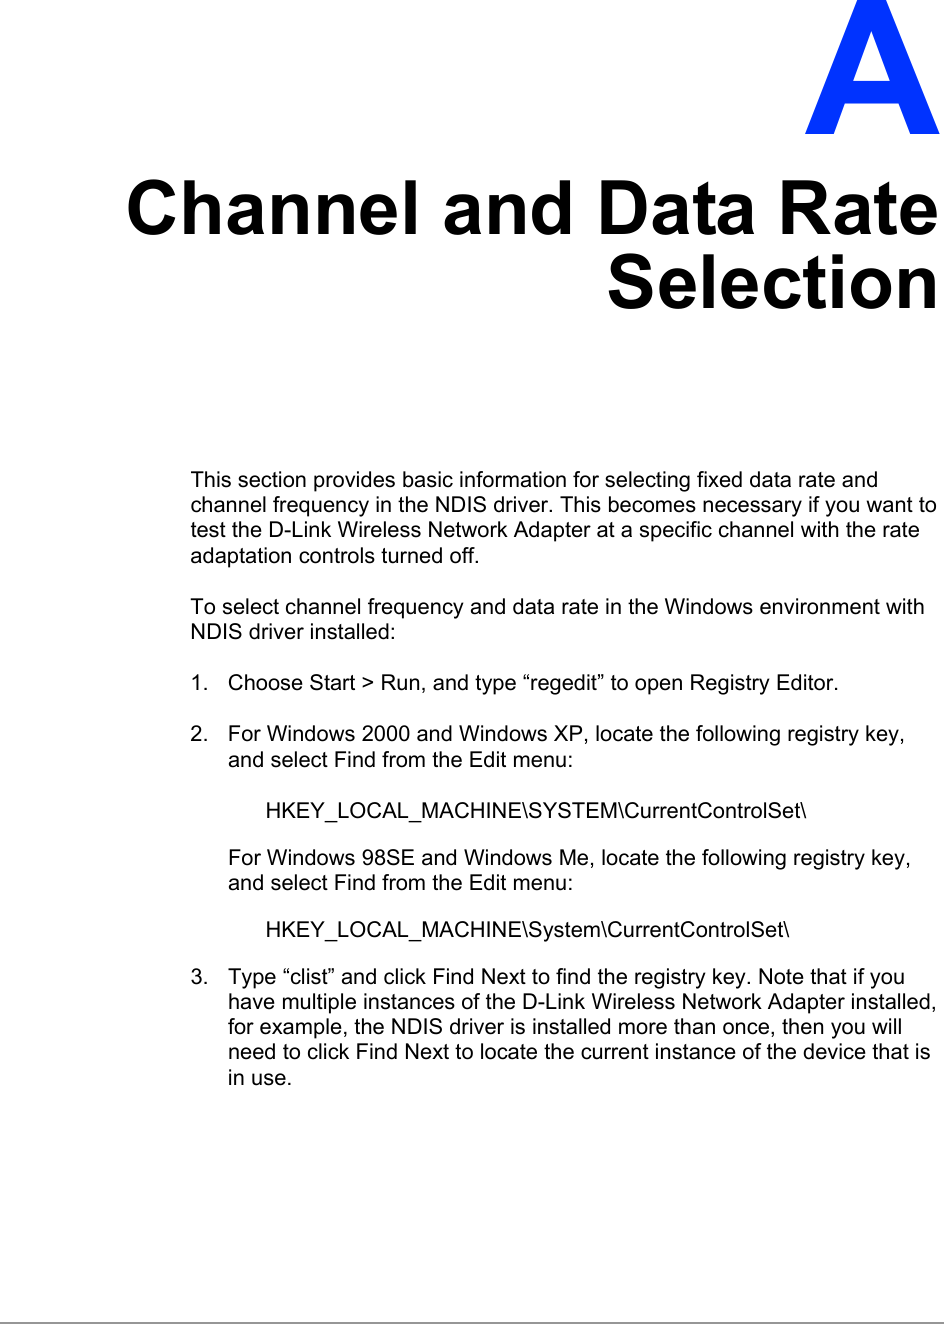   A Channel and Data Rate Selection This section provides basic information for selecting fixed data rate and channel frequency in the NDIS driver. This becomes necessary if you want to test the D-Link Wireless Network Adapter at a specific channel with the rate adaptation controls turned off. To select channel frequency and data rate in the Windows environment with NDIS driver installed: 1.  Choose Start &gt; Run, and type “regedit” to open Registry Editor. 2.  For Windows 2000 and Windows XP, locate the following registry key, and select Find from the Edit menu: HKEY_LOCAL_MACHINE\SYSTEM\CurrentControlSet\ For Windows 98SE and Windows Me, locate the following registry key, and select Find from the Edit menu: HKEY_LOCAL_MACHINE\System\CurrentControlSet\ 3.  Type “clist” and click Find Next to find the registry key. Note that if you have multiple instances of the D-Link Wireless Network Adapter installed, for example, the NDIS driver is installed more than once, then you will need to click Find Next to locate the current instance of the device that is in use. 